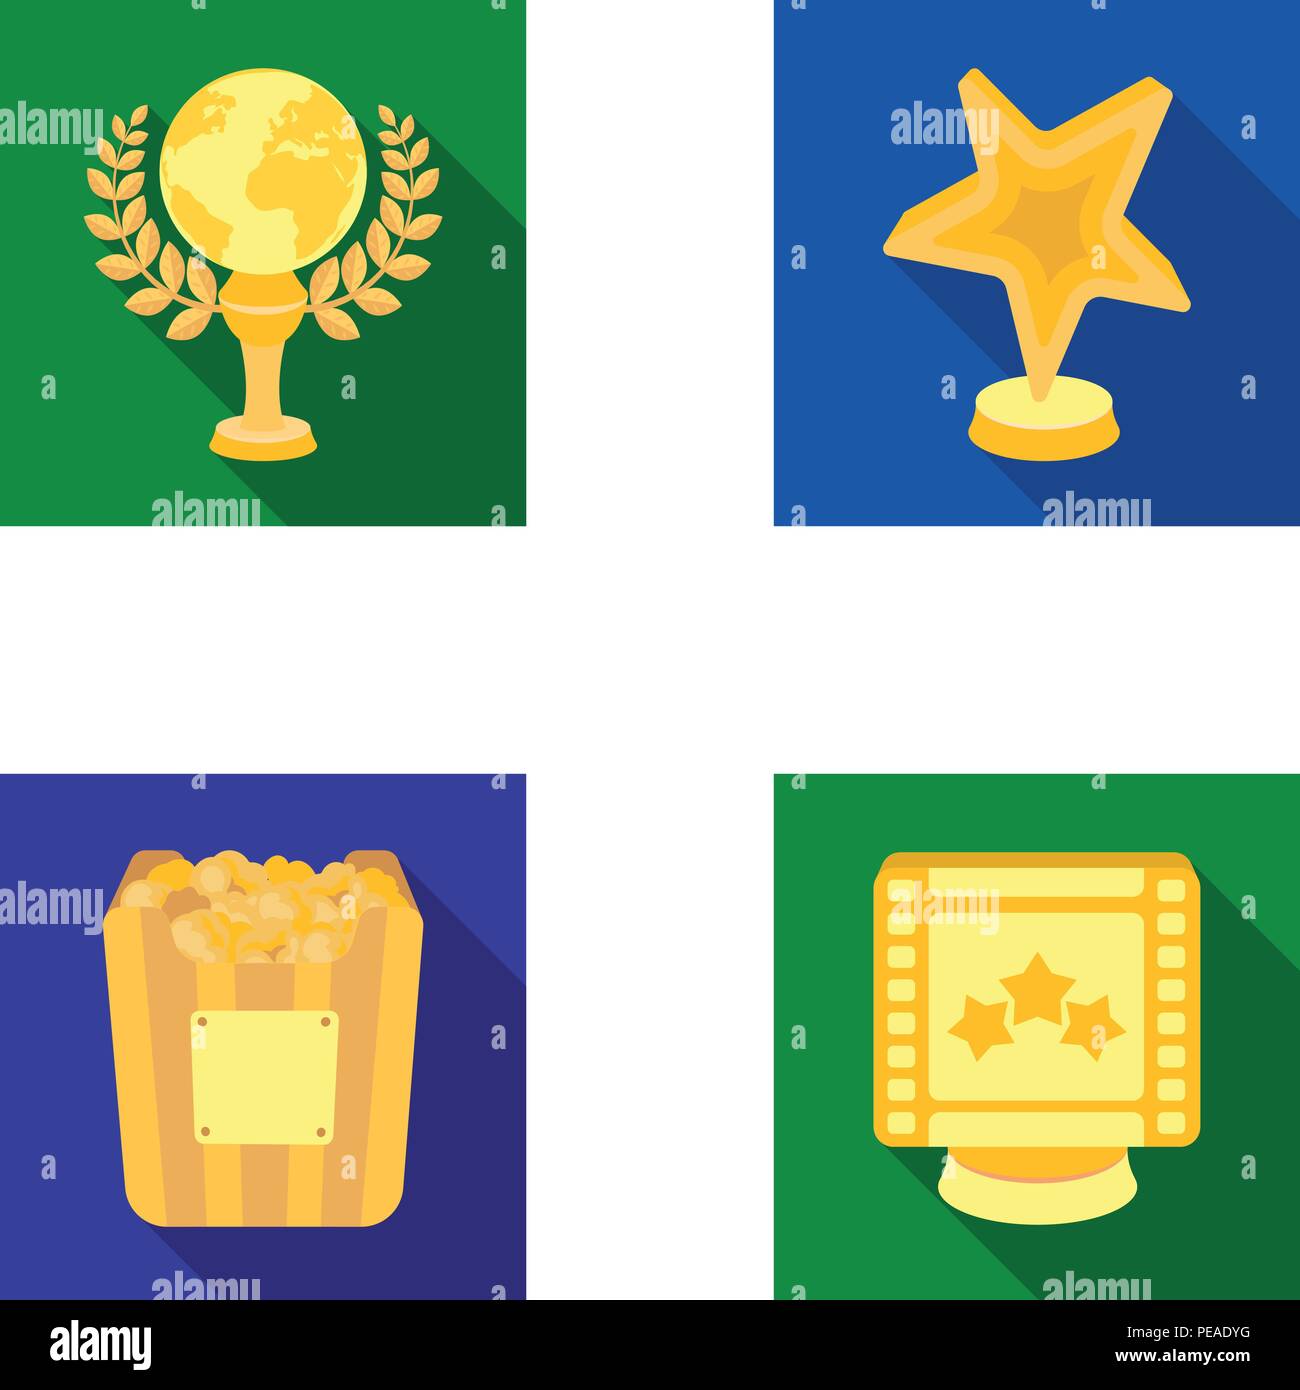 Actor Award Best Collection Cup Different Earth Film Flat Form Icon Illustration Isolated Kinds Logo Movie Popcorn Recognition Role Set Sign Stand Star Success Symbol Value Vector View Web World Vector Vectors Stock Vector Image Art Alamy